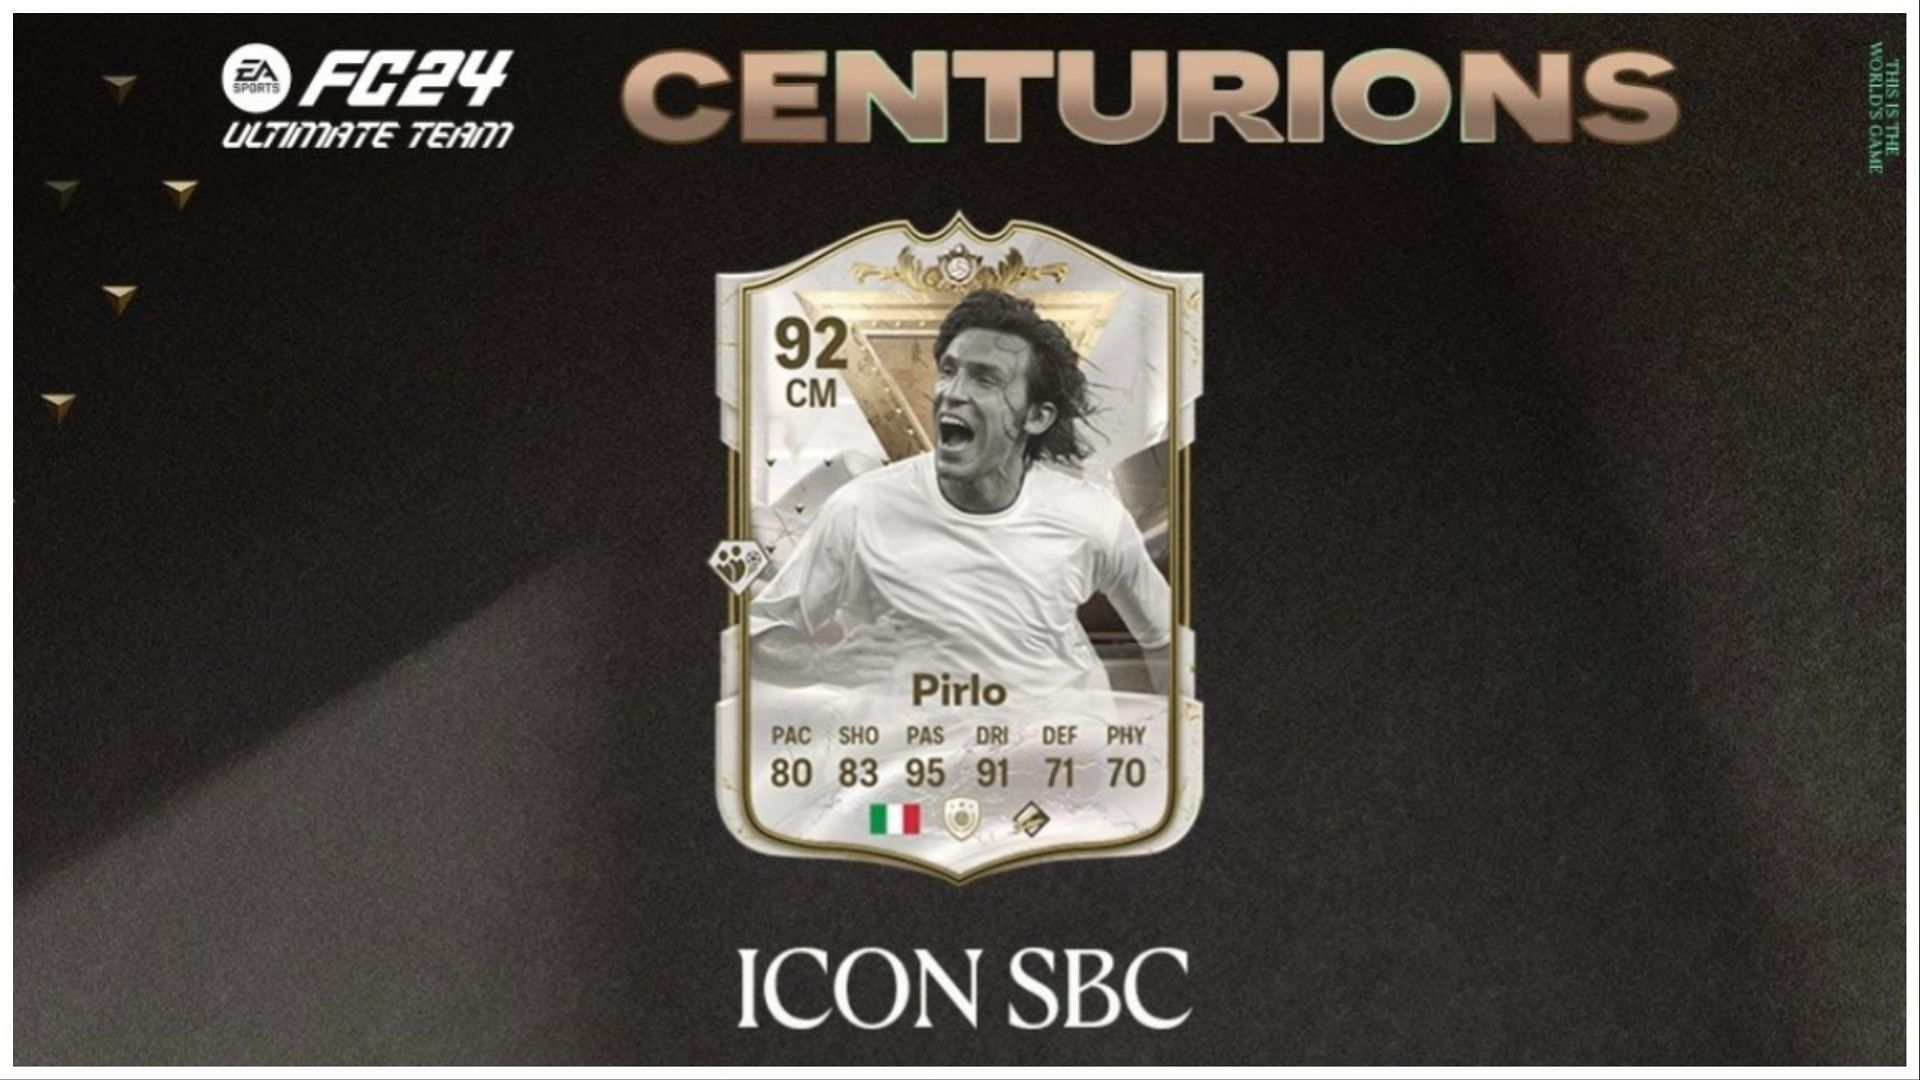 Centurions Pirlo is now available (Image via EA Sports)